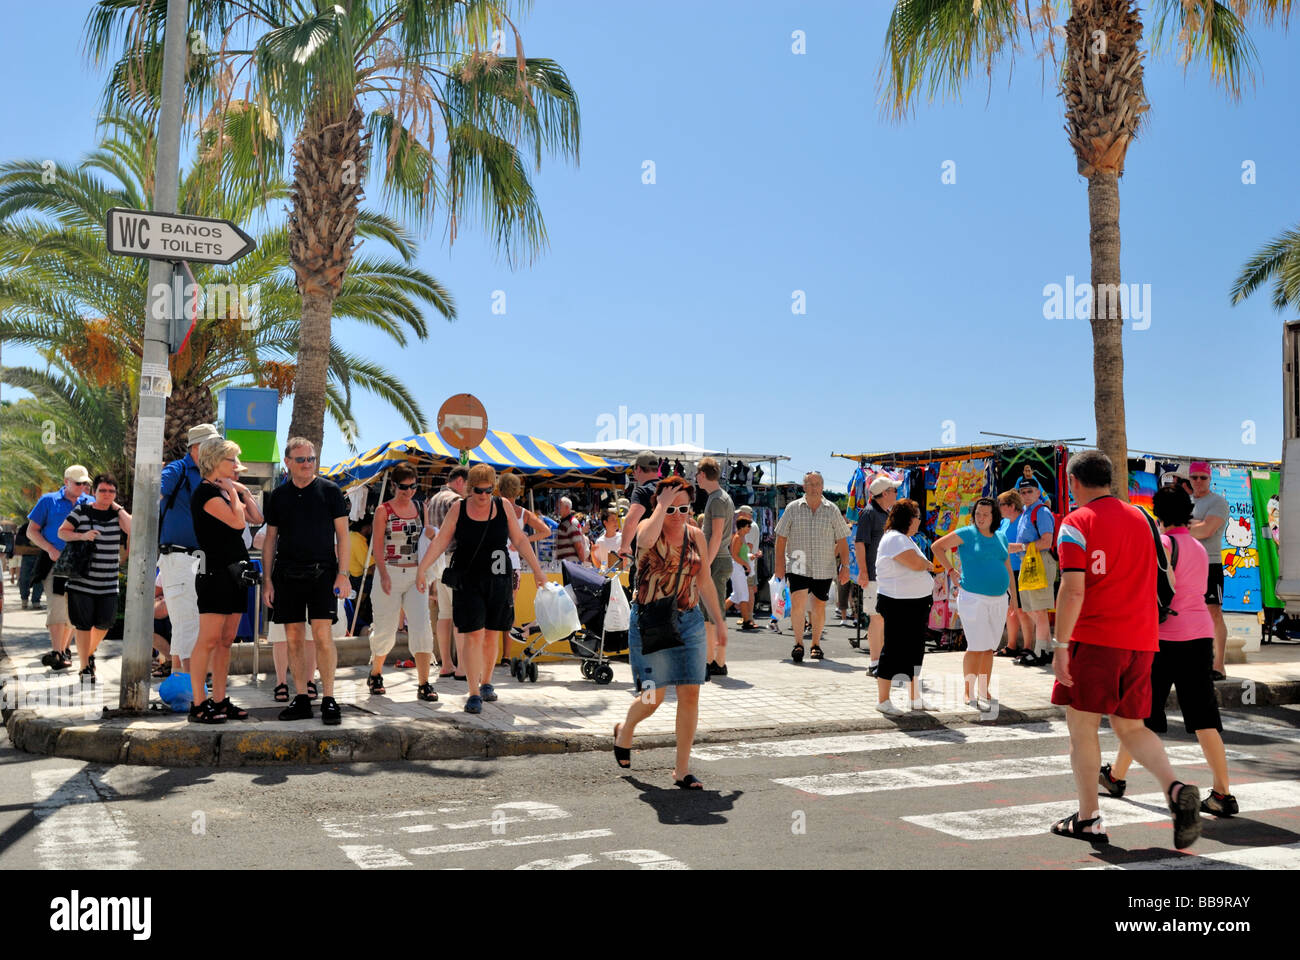 The tuesday market in Arguineguin village, Gran Canaria, Canary ...